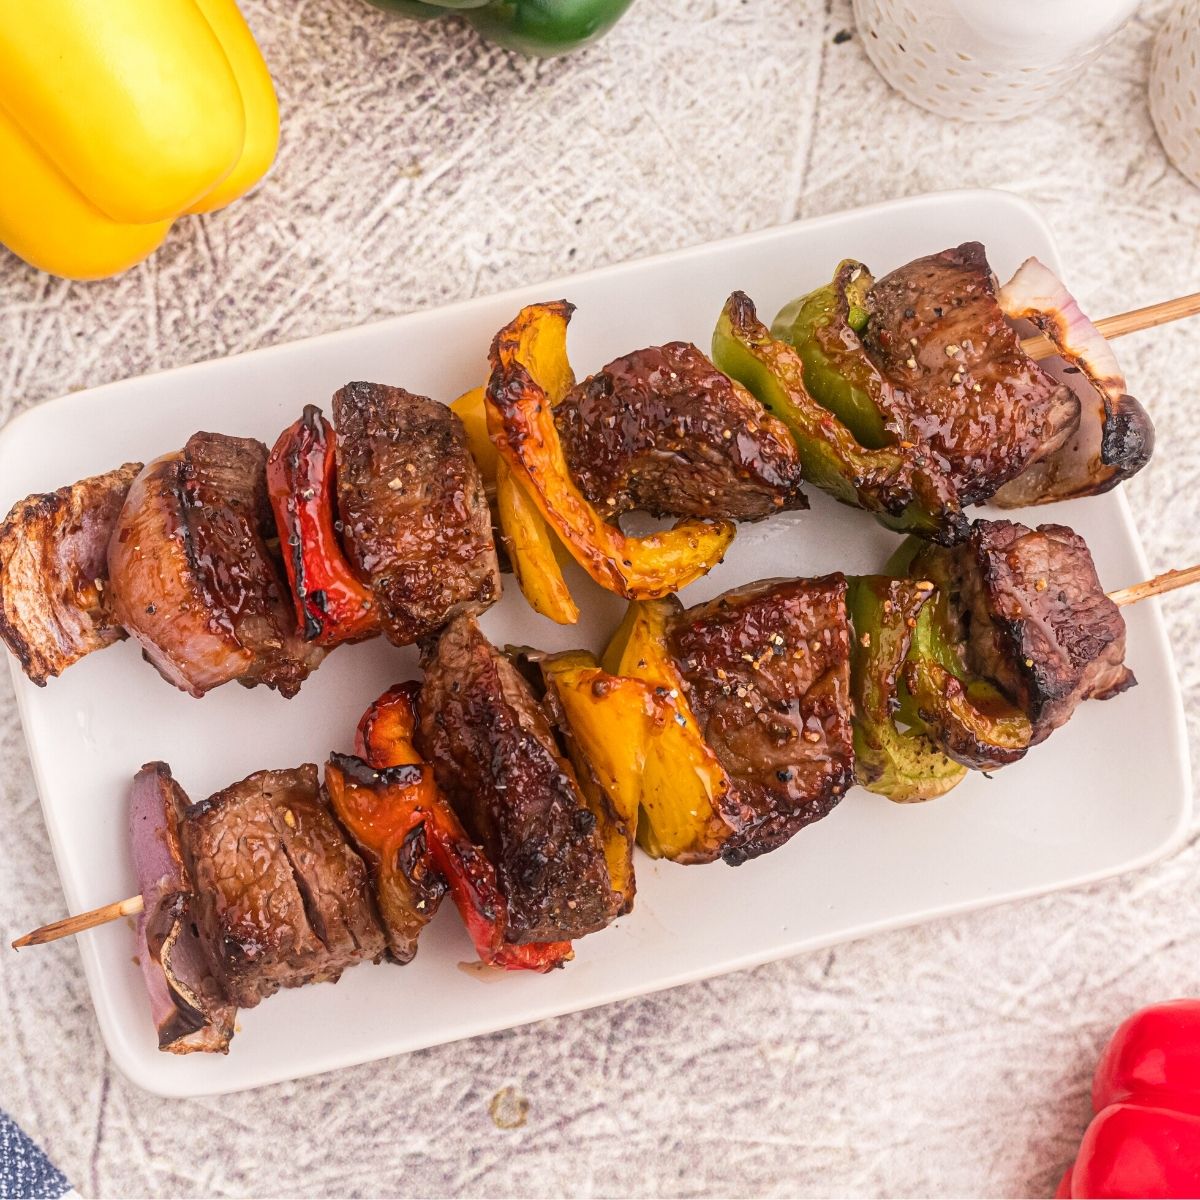 Steak kabobs with vegetables on a white plate with bell peppers scattered on the table.